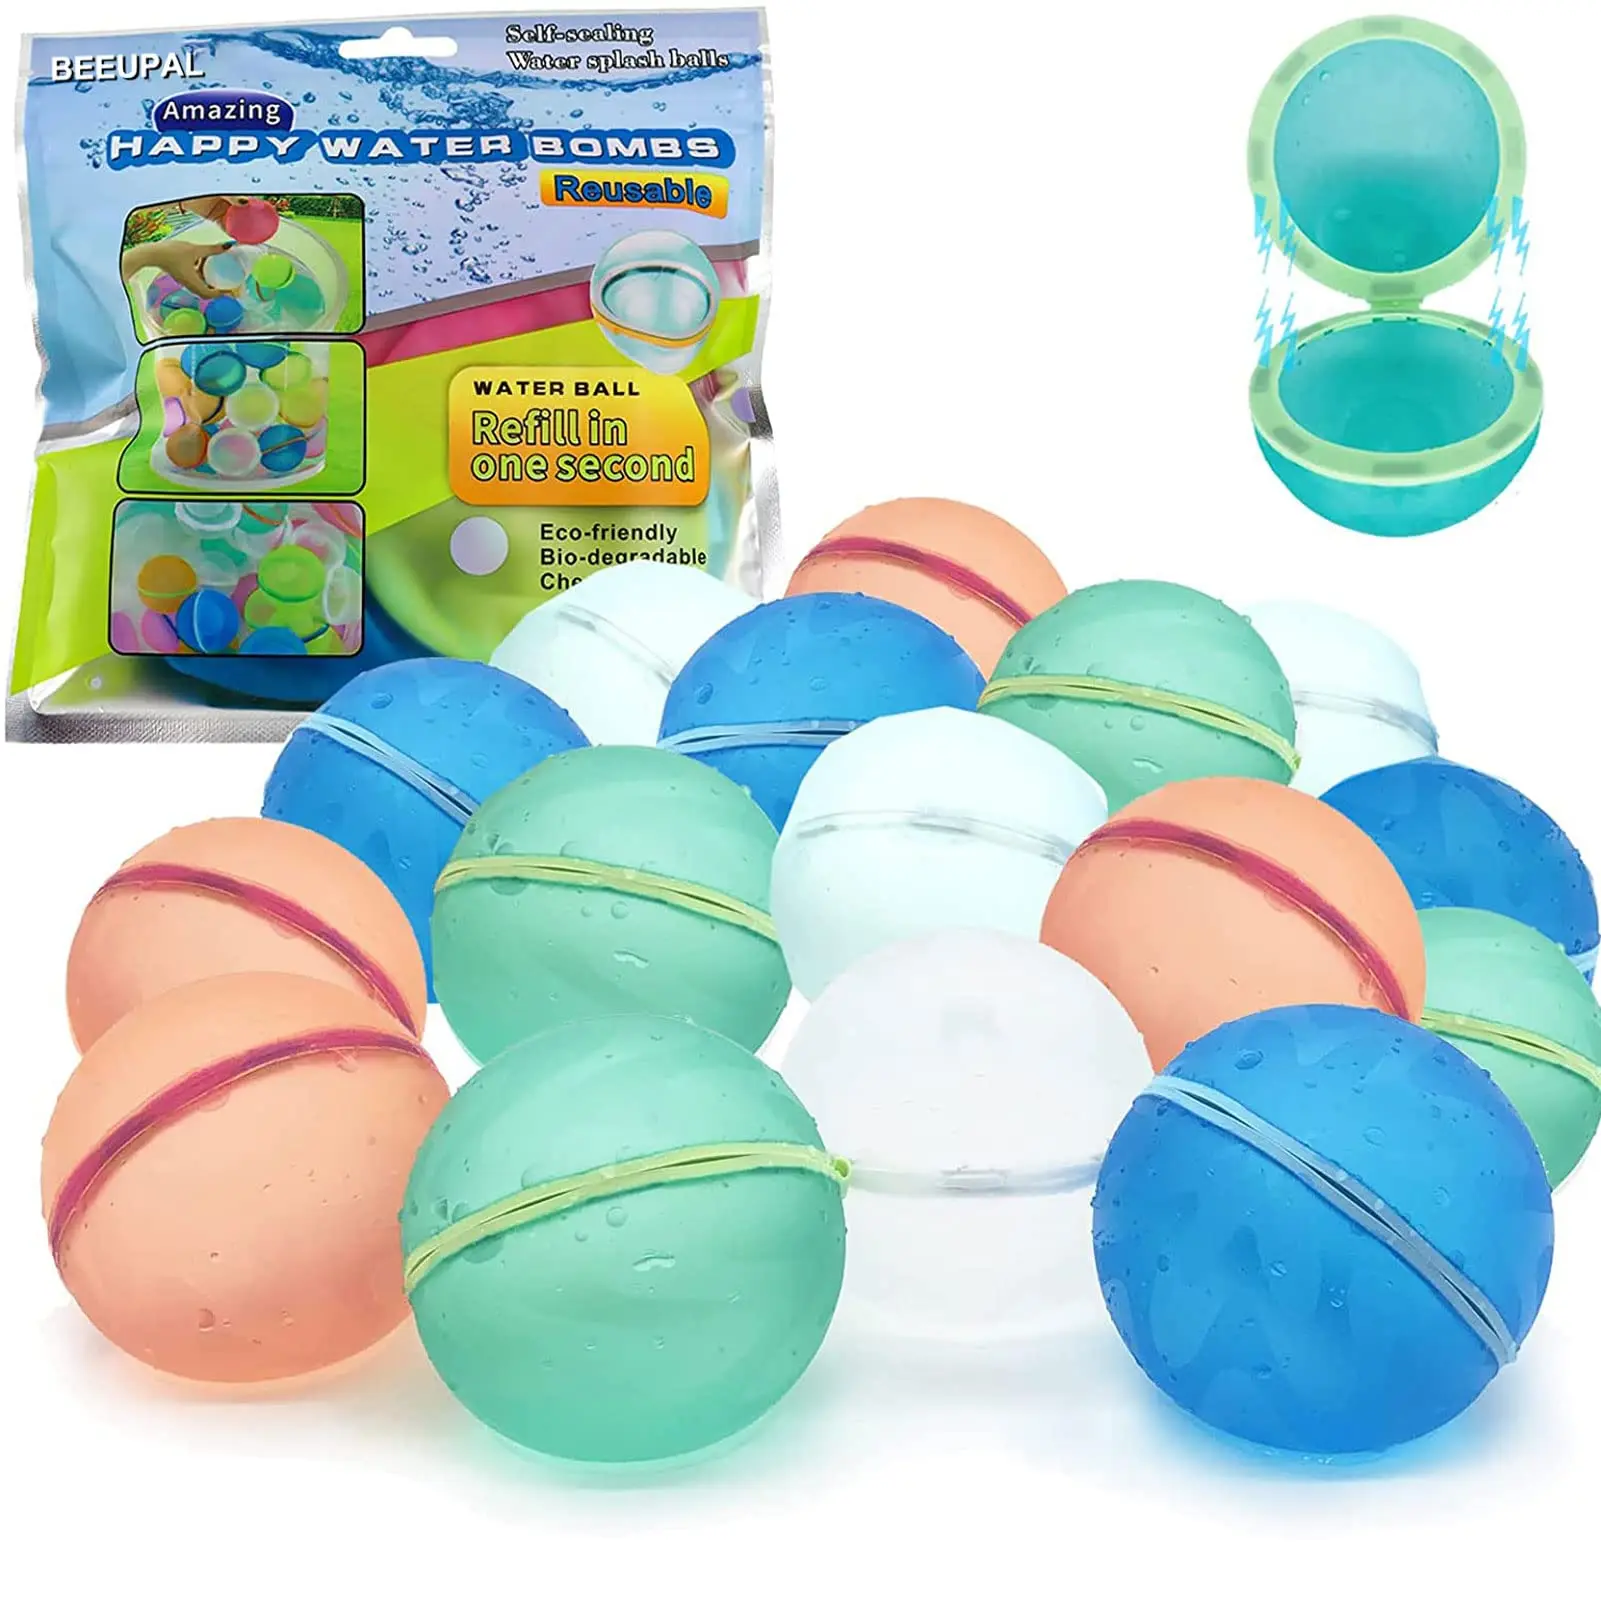 

Reusable Water Balloons Quick Fill Self Sealing, Refillable Water Balls Water Bomb Splash for Water Fight Game Summer Pool Party